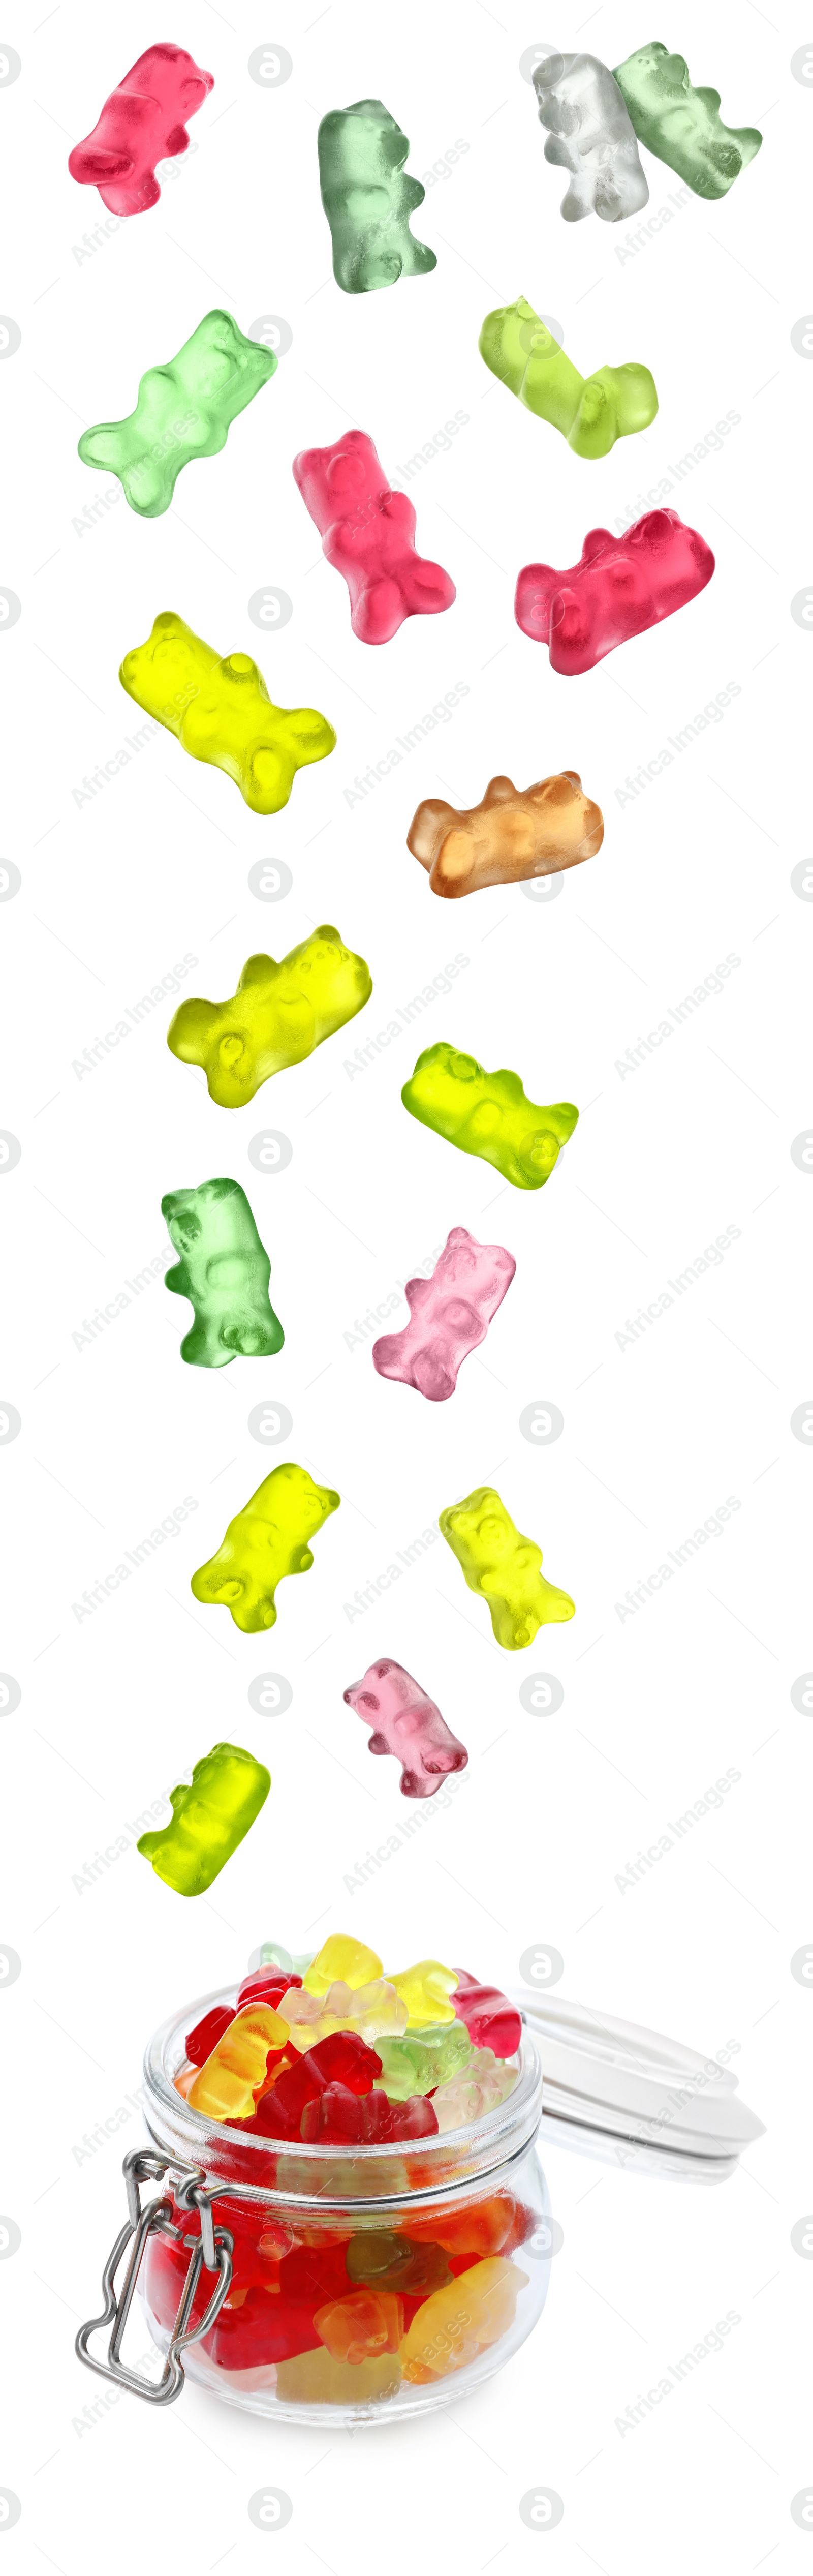 Image of Delicious jelly candies falling into glass jar on white background